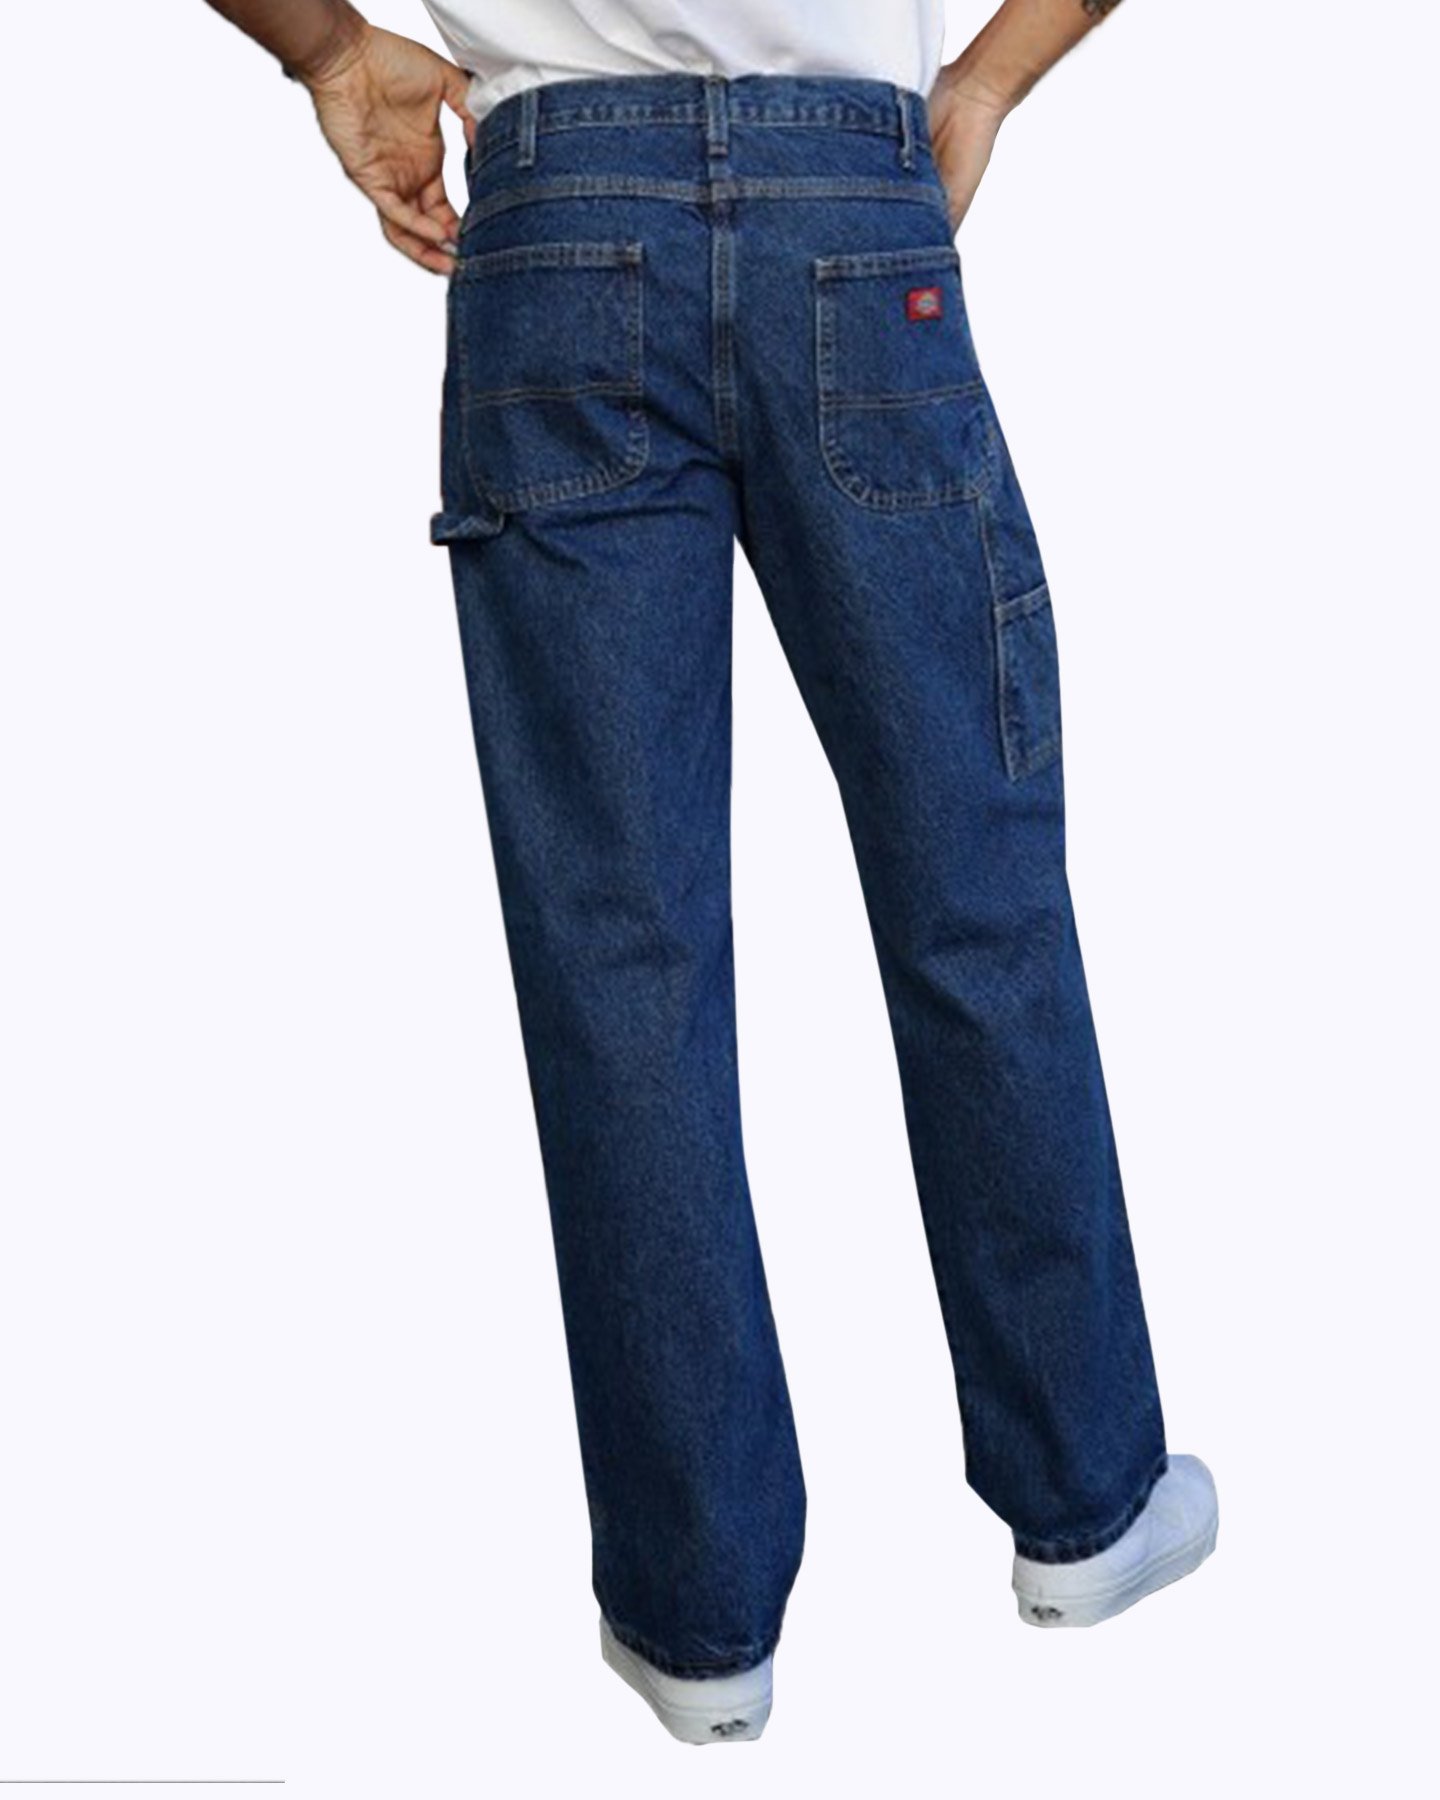 Dickies Relaxed Fit Carpenter Jean, Ozmosis